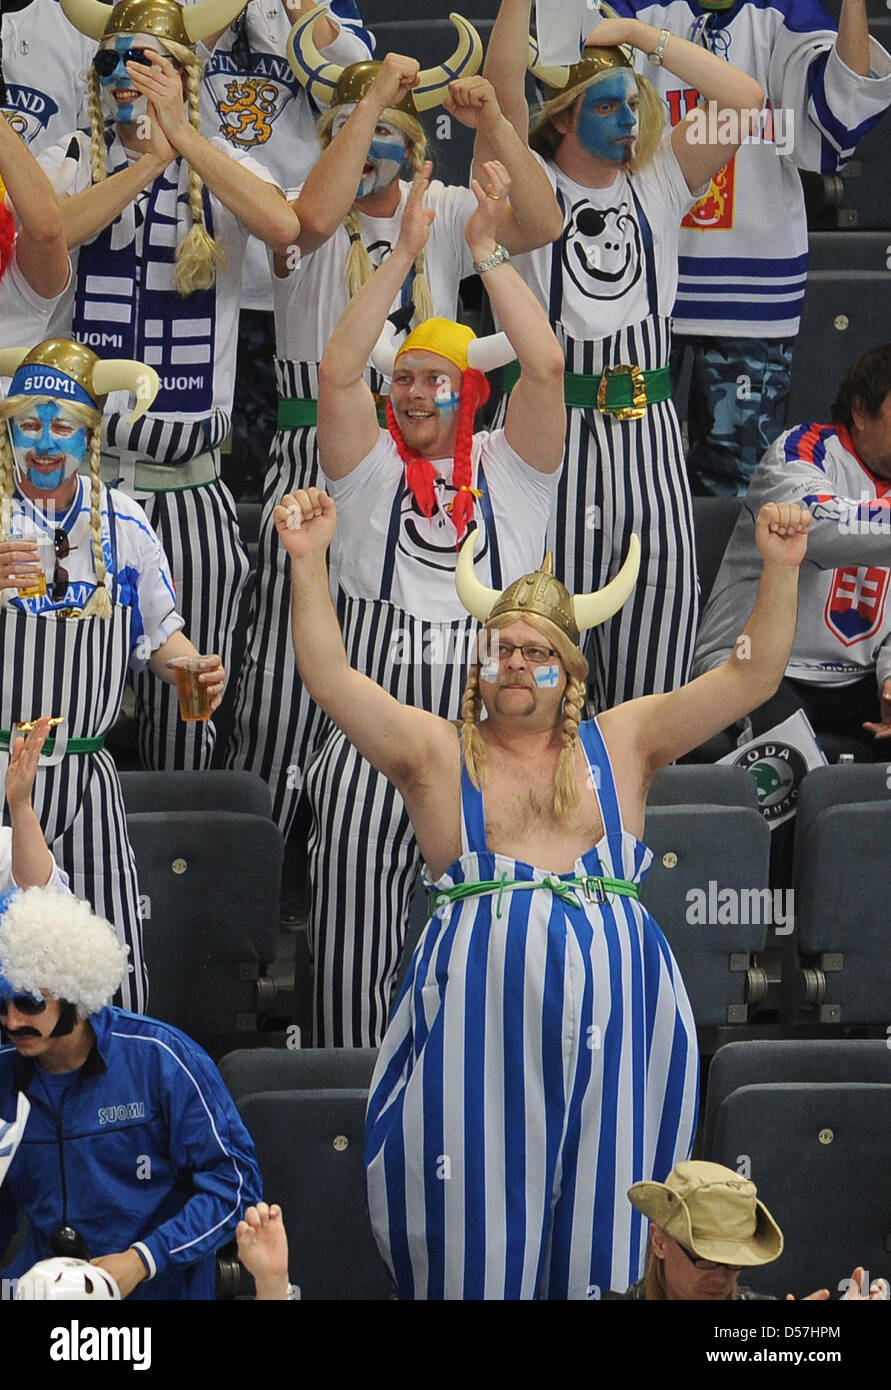 Finnish fans cheer their team during the Ice Hockey World Championship group E match Finland vs Slovakia at Lanxess Arena in Cologne, Germany, 17 May 2010. Photo: ACHIM SCHEIDEMANN (ATTENTION EDITORIAL USAGE ONLY!) Stock Photo